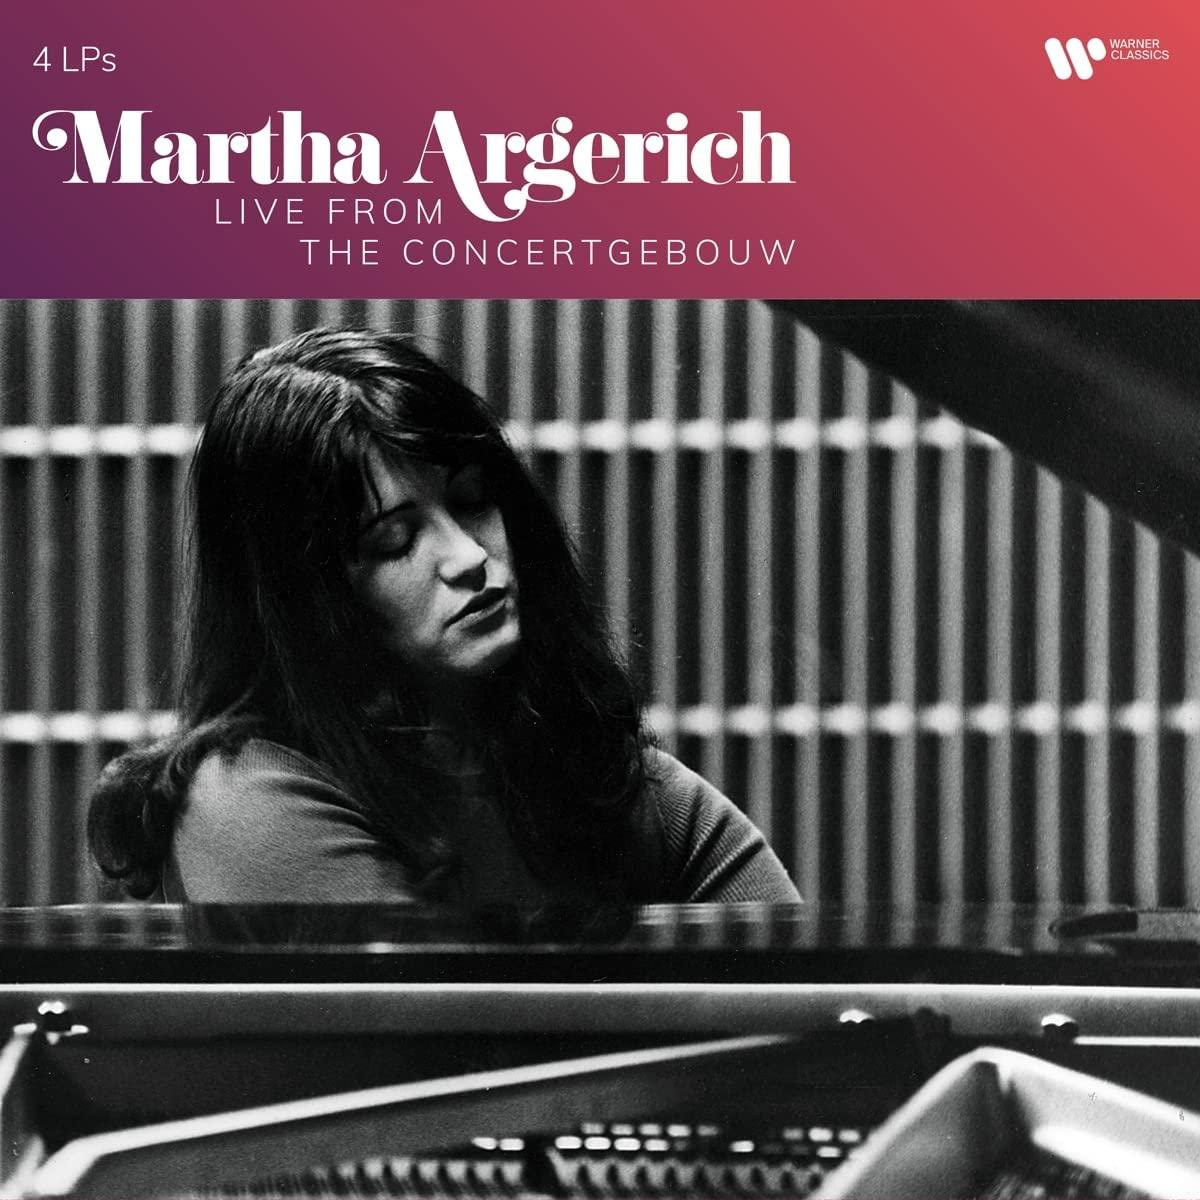 Martha Argerich - Live From The Concertgebouw (0190296525124)